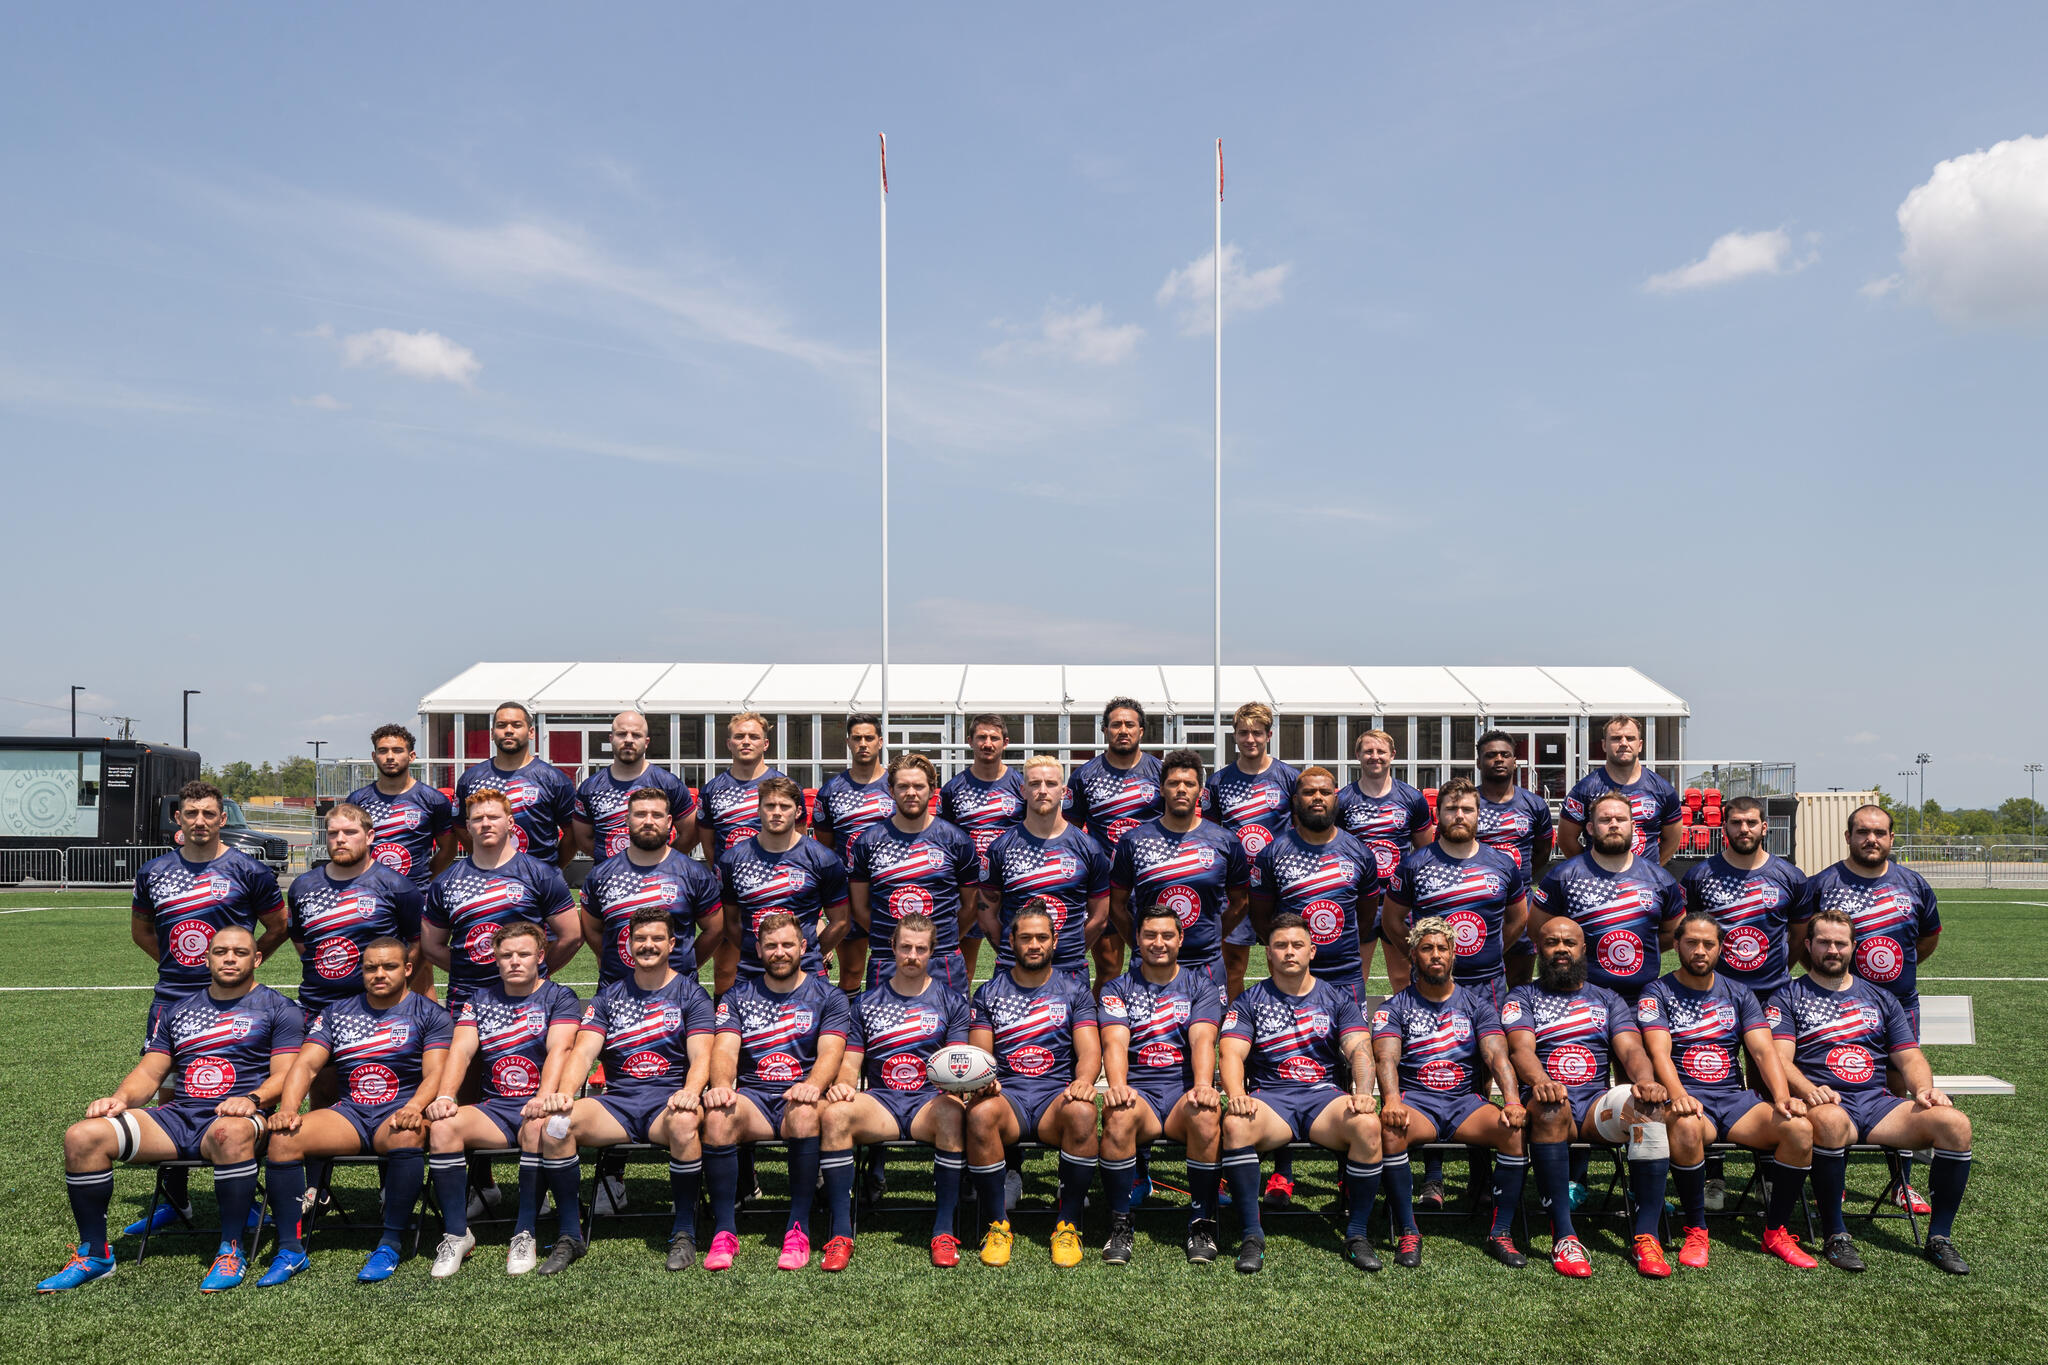 Cherry Blossom Celebration Meets Professional Rugby : Old Glory DC